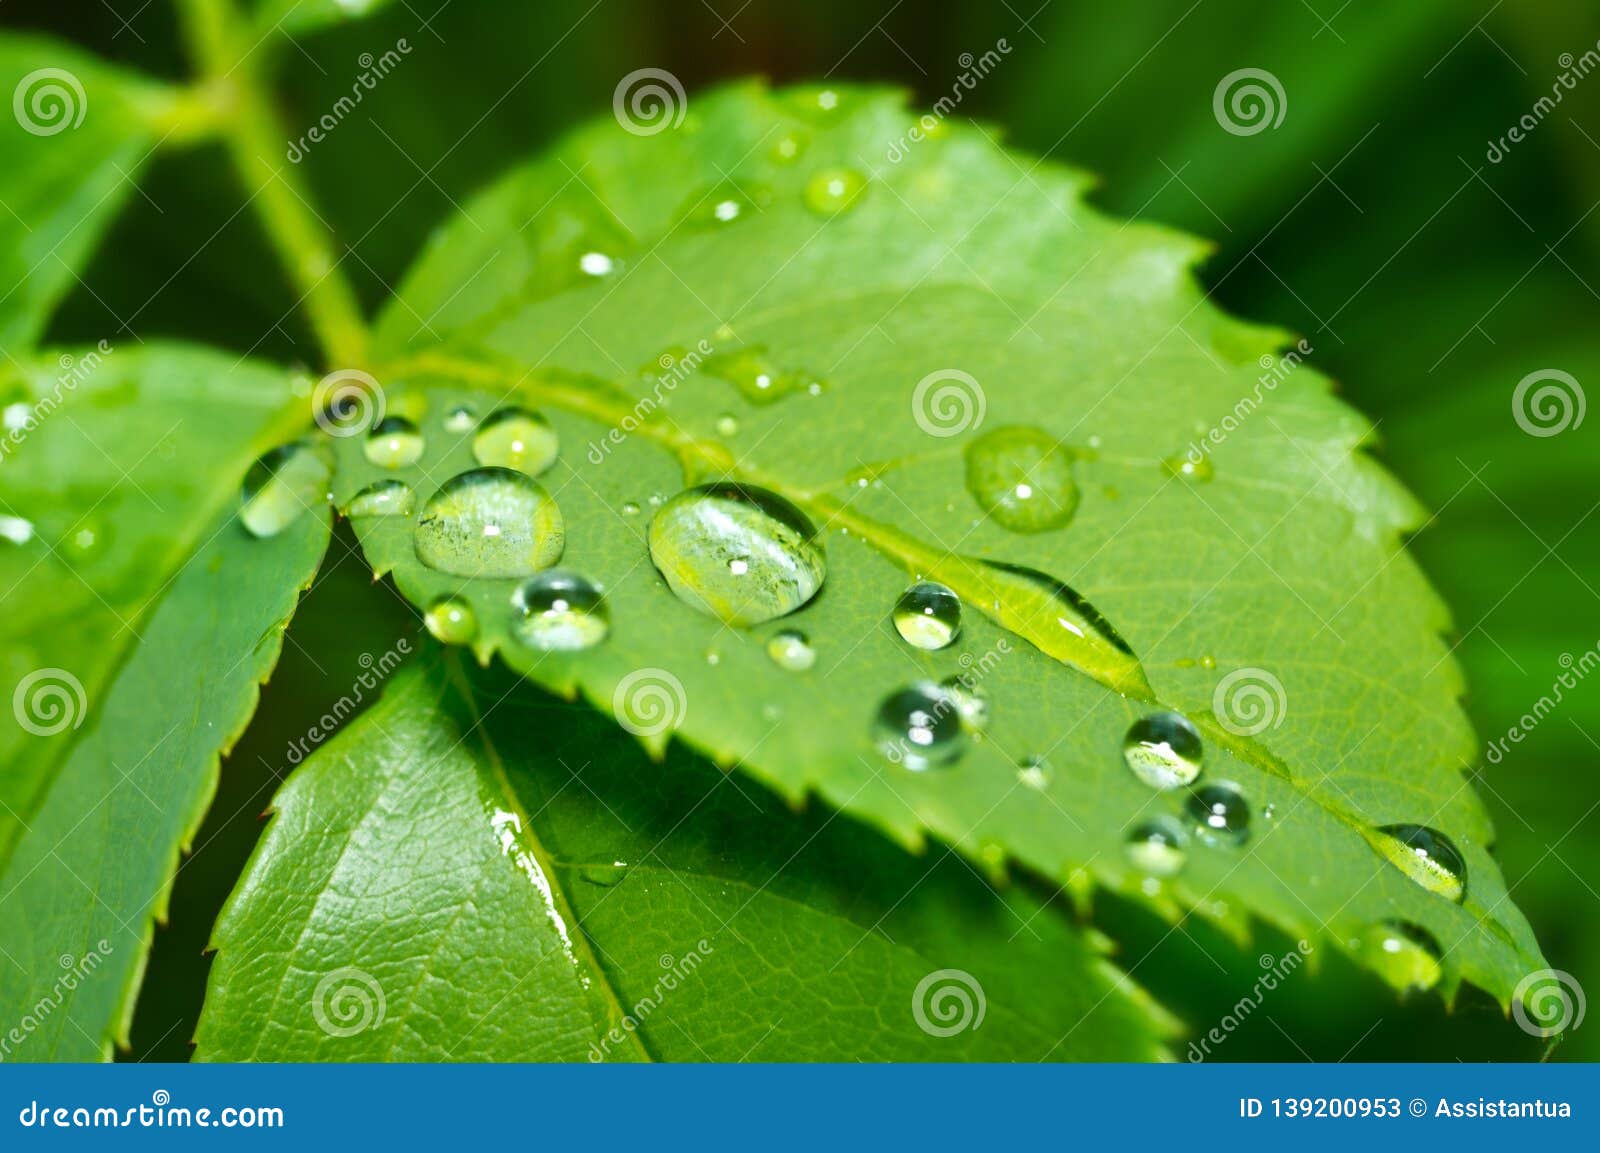 oyun Böceklere bakın Radyoaktif  Drops of Dew in the Green Leaves. Beautiful Nature Background with Morning  Fresh Drops of Transparent Rain Water on a Green Leaf Stock Image - Image  of close, foliage: 139200953